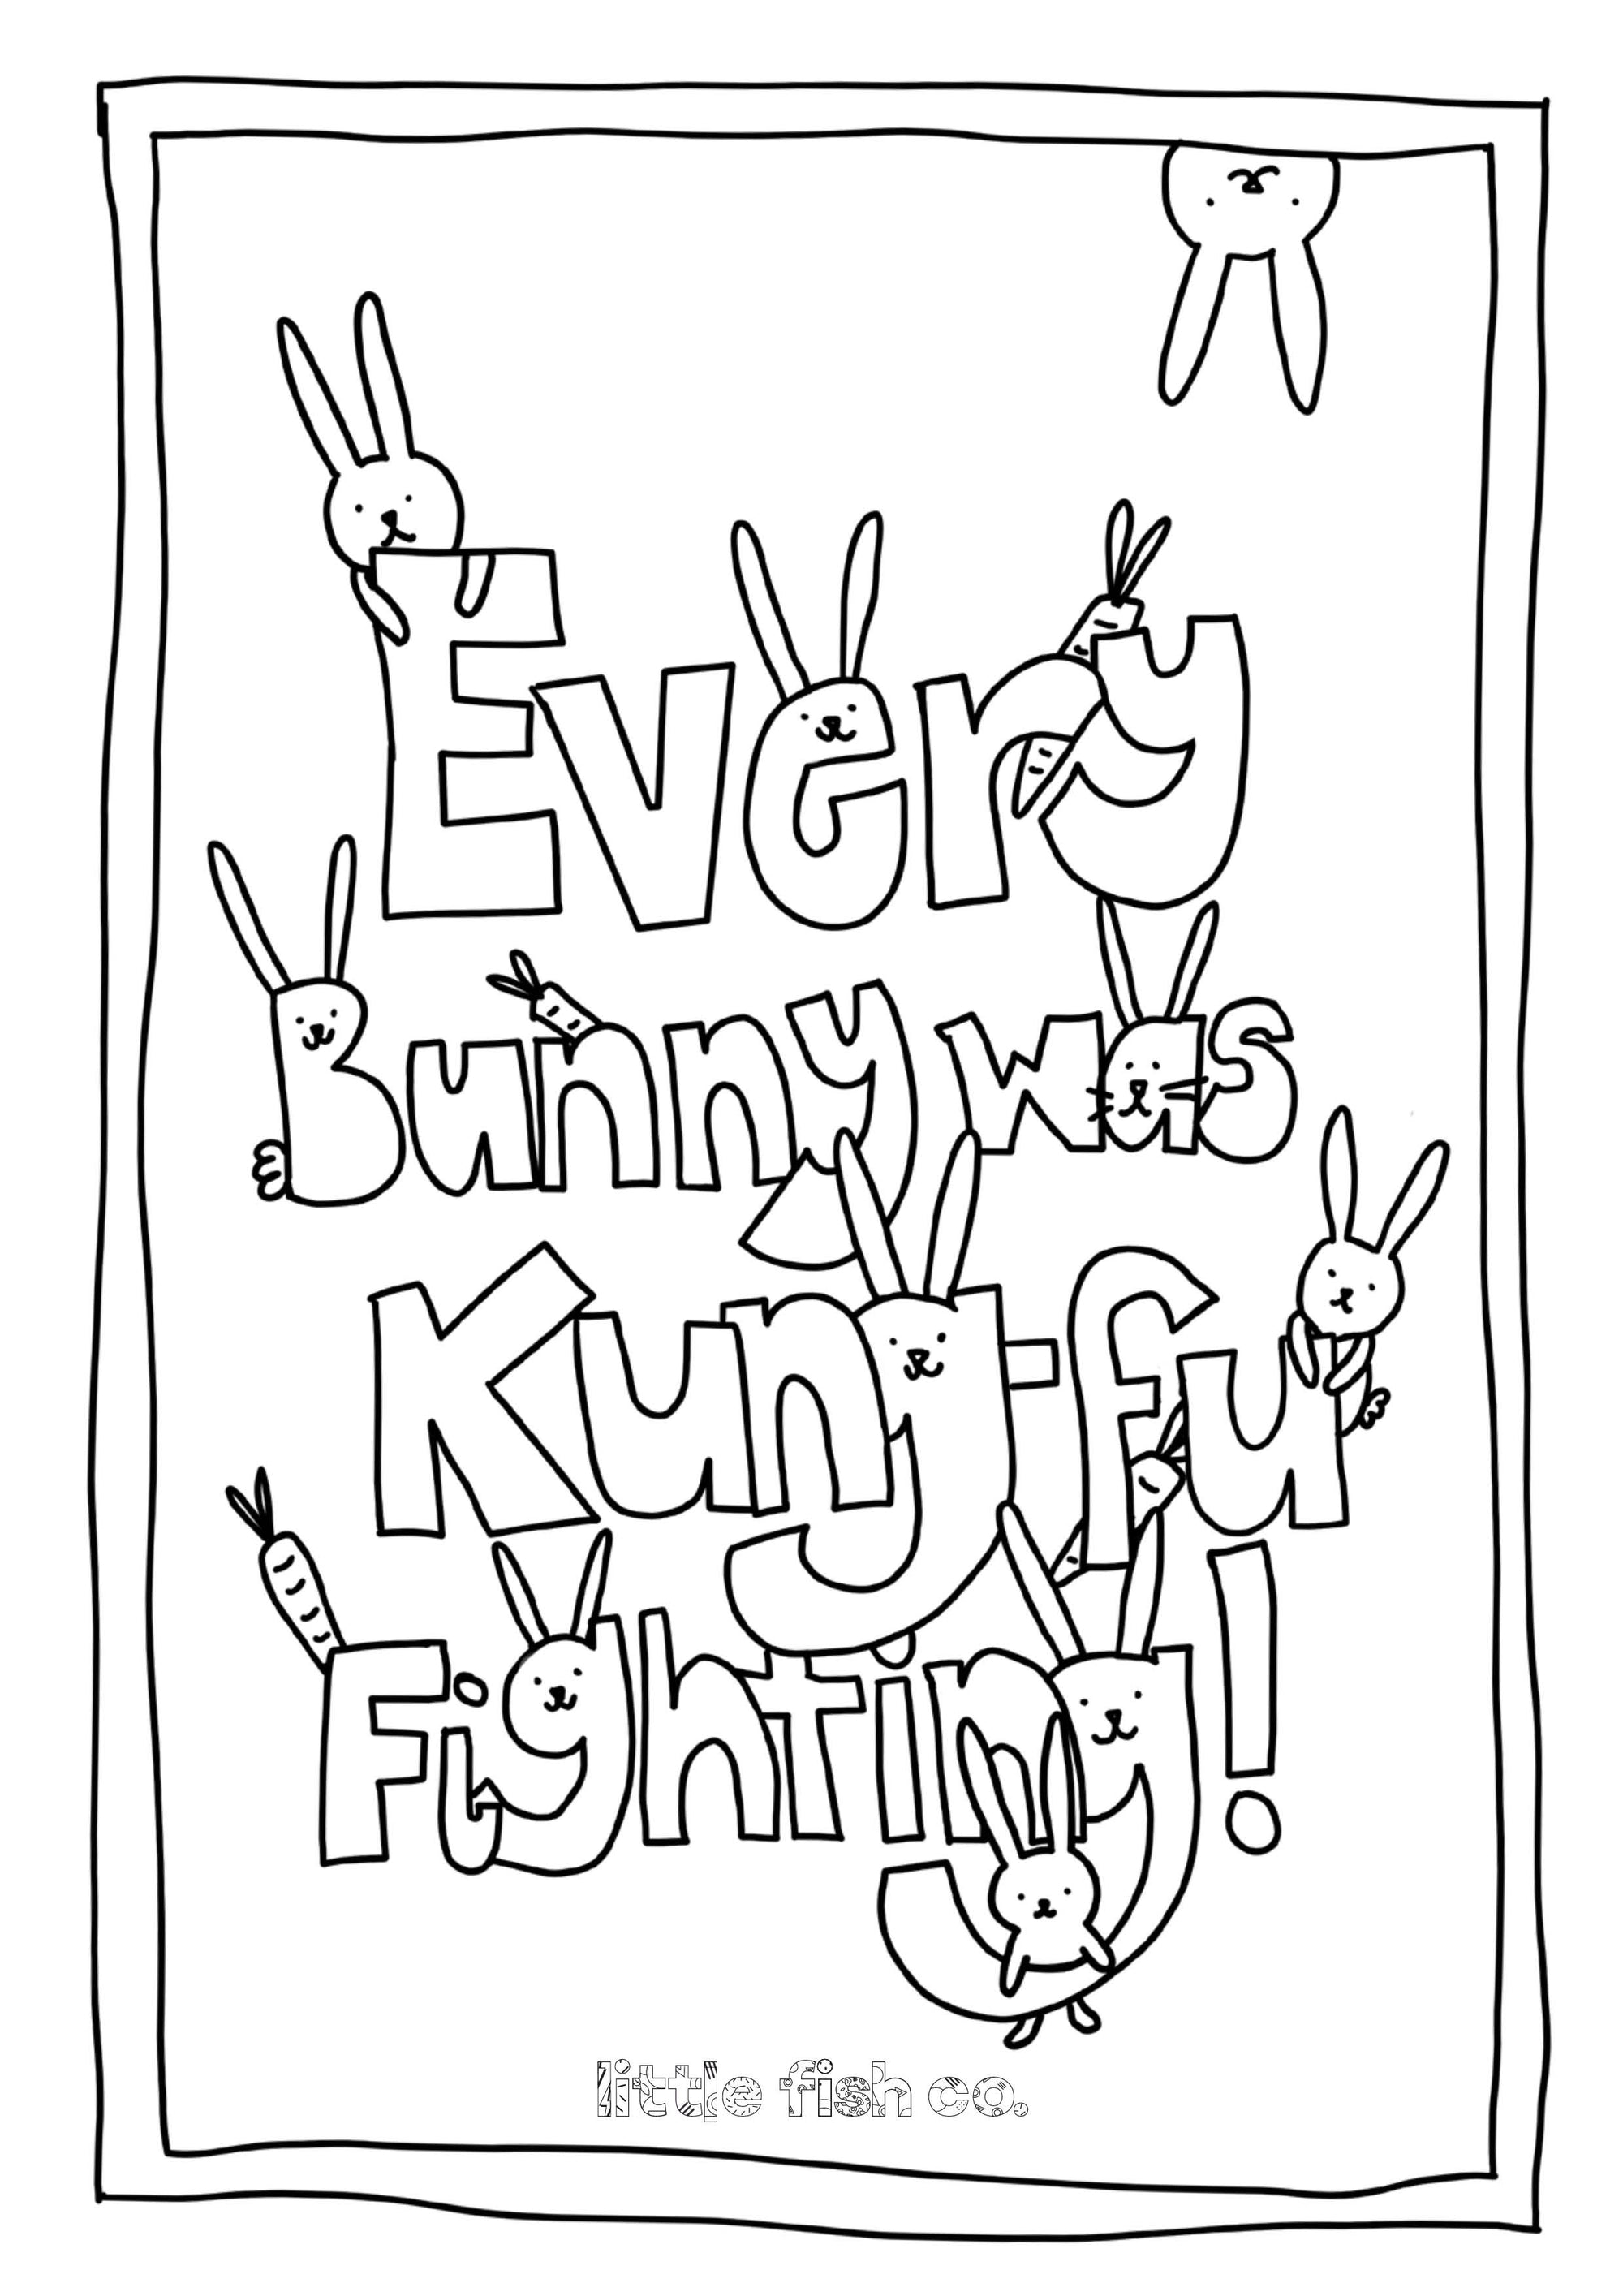 Every Bunny is kung fu fighting- colouring in sheet-Little Fish Co.